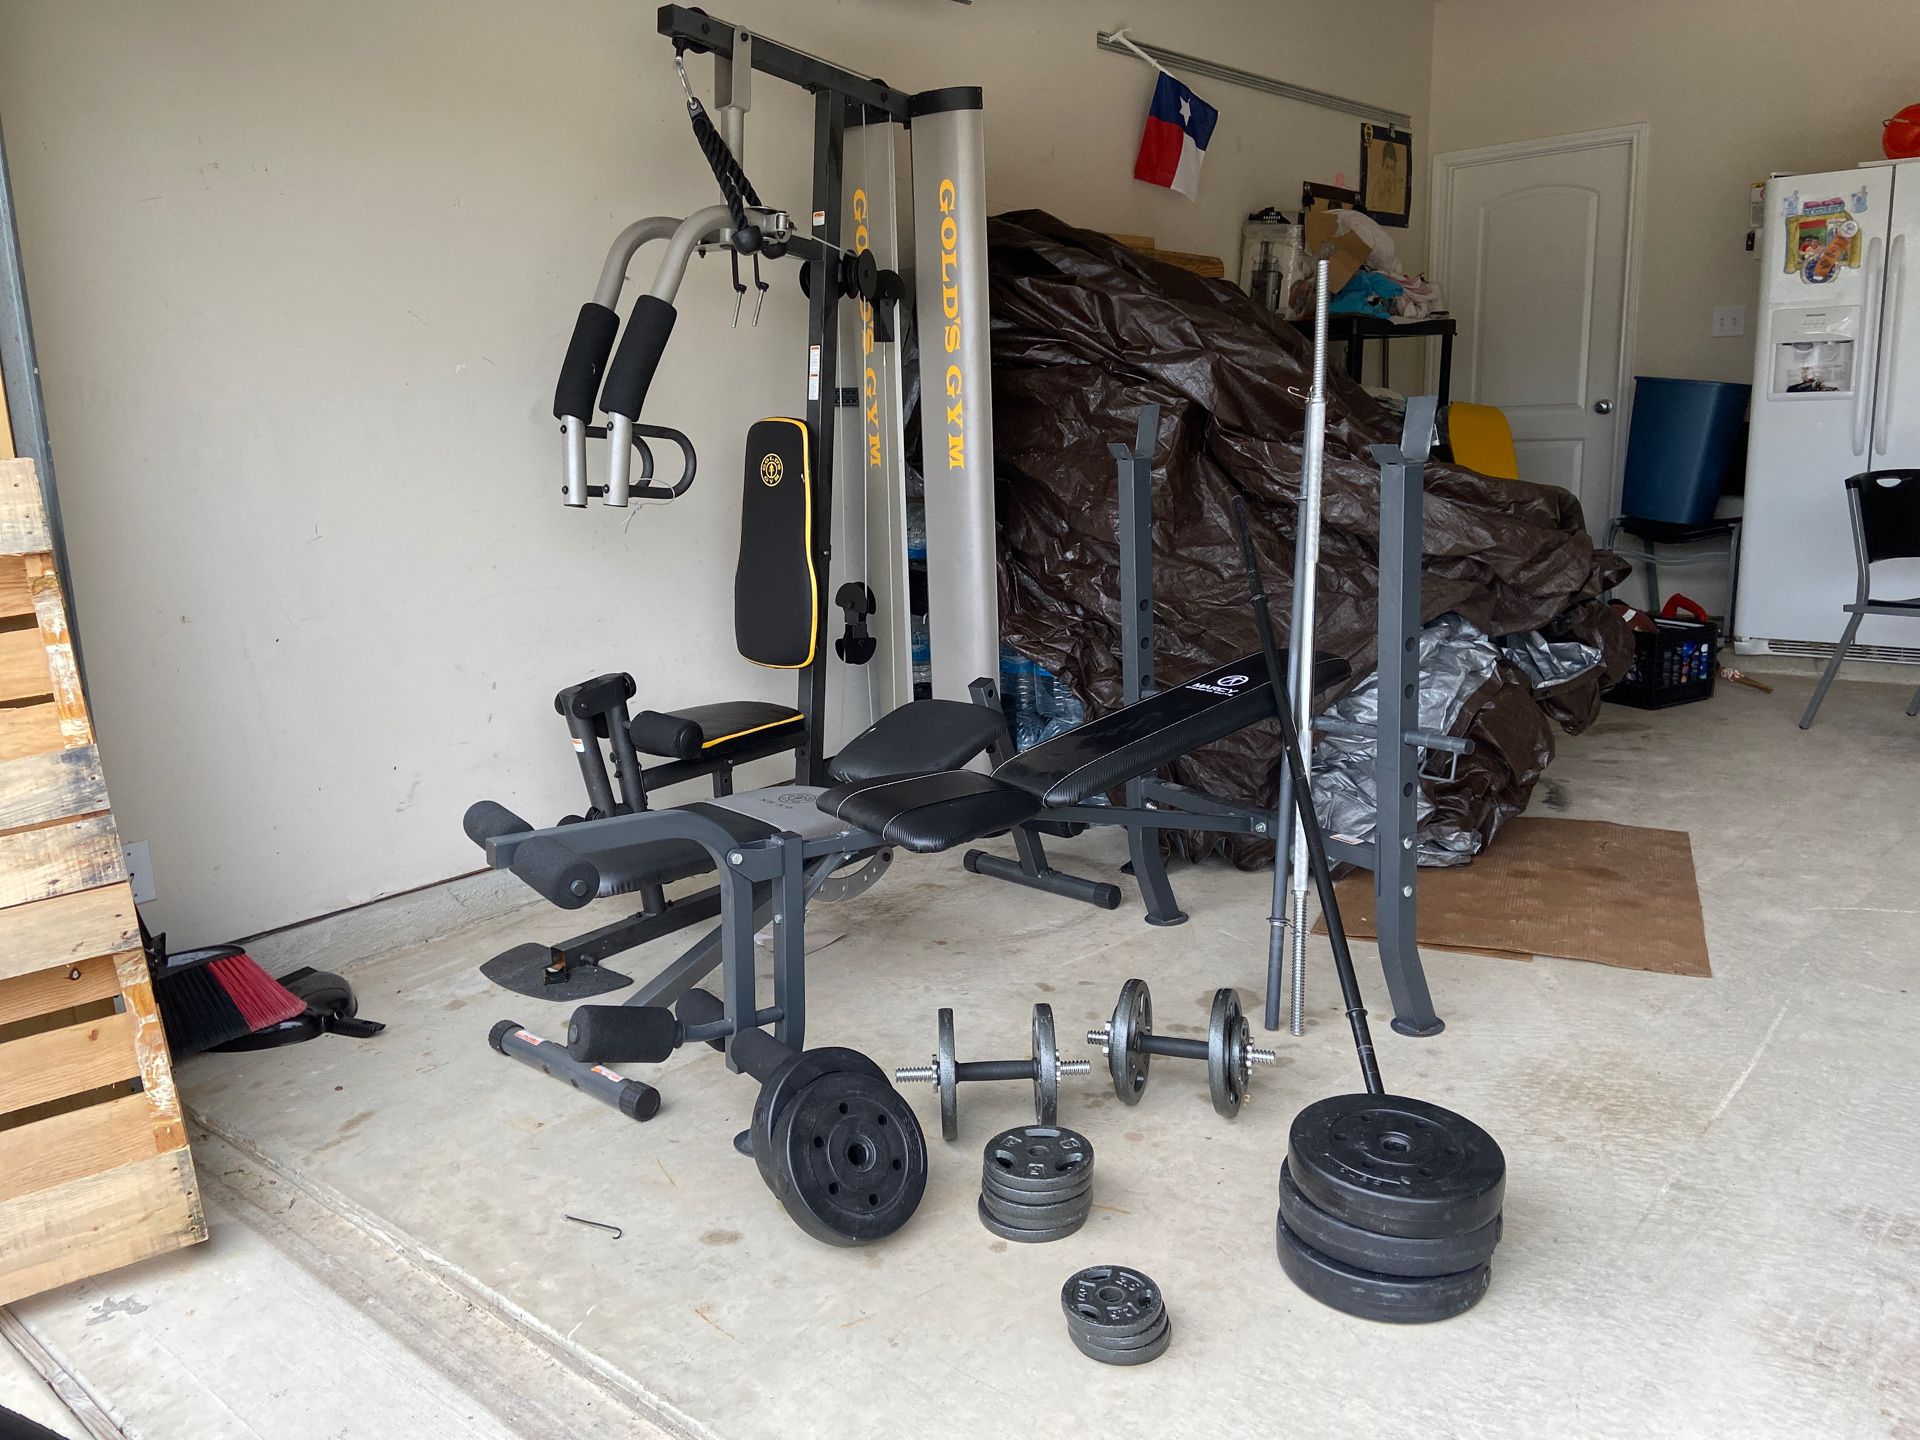 Workout bench and weights and bars